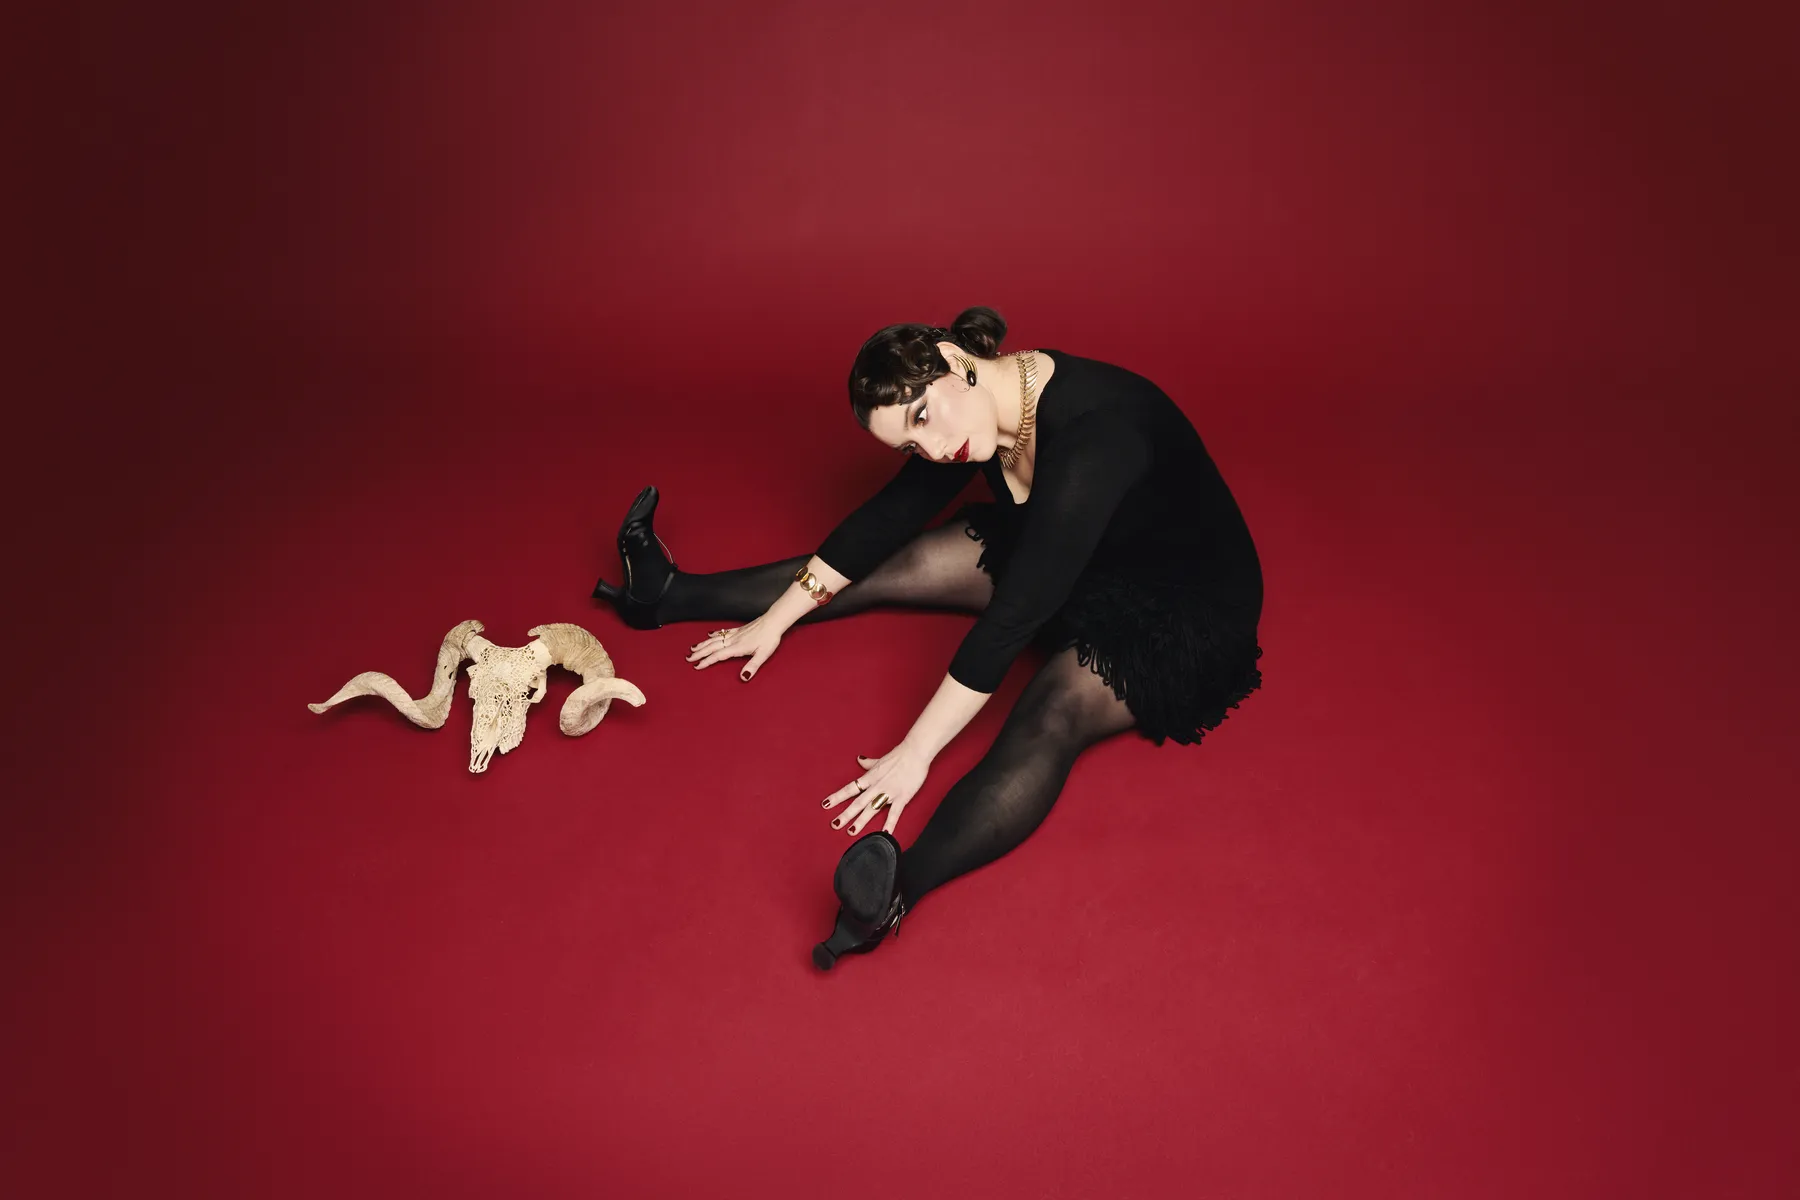 A photo of the artist Gillian Stone showing a woman in a black dress sitting on a red floor with a ram skull beside her